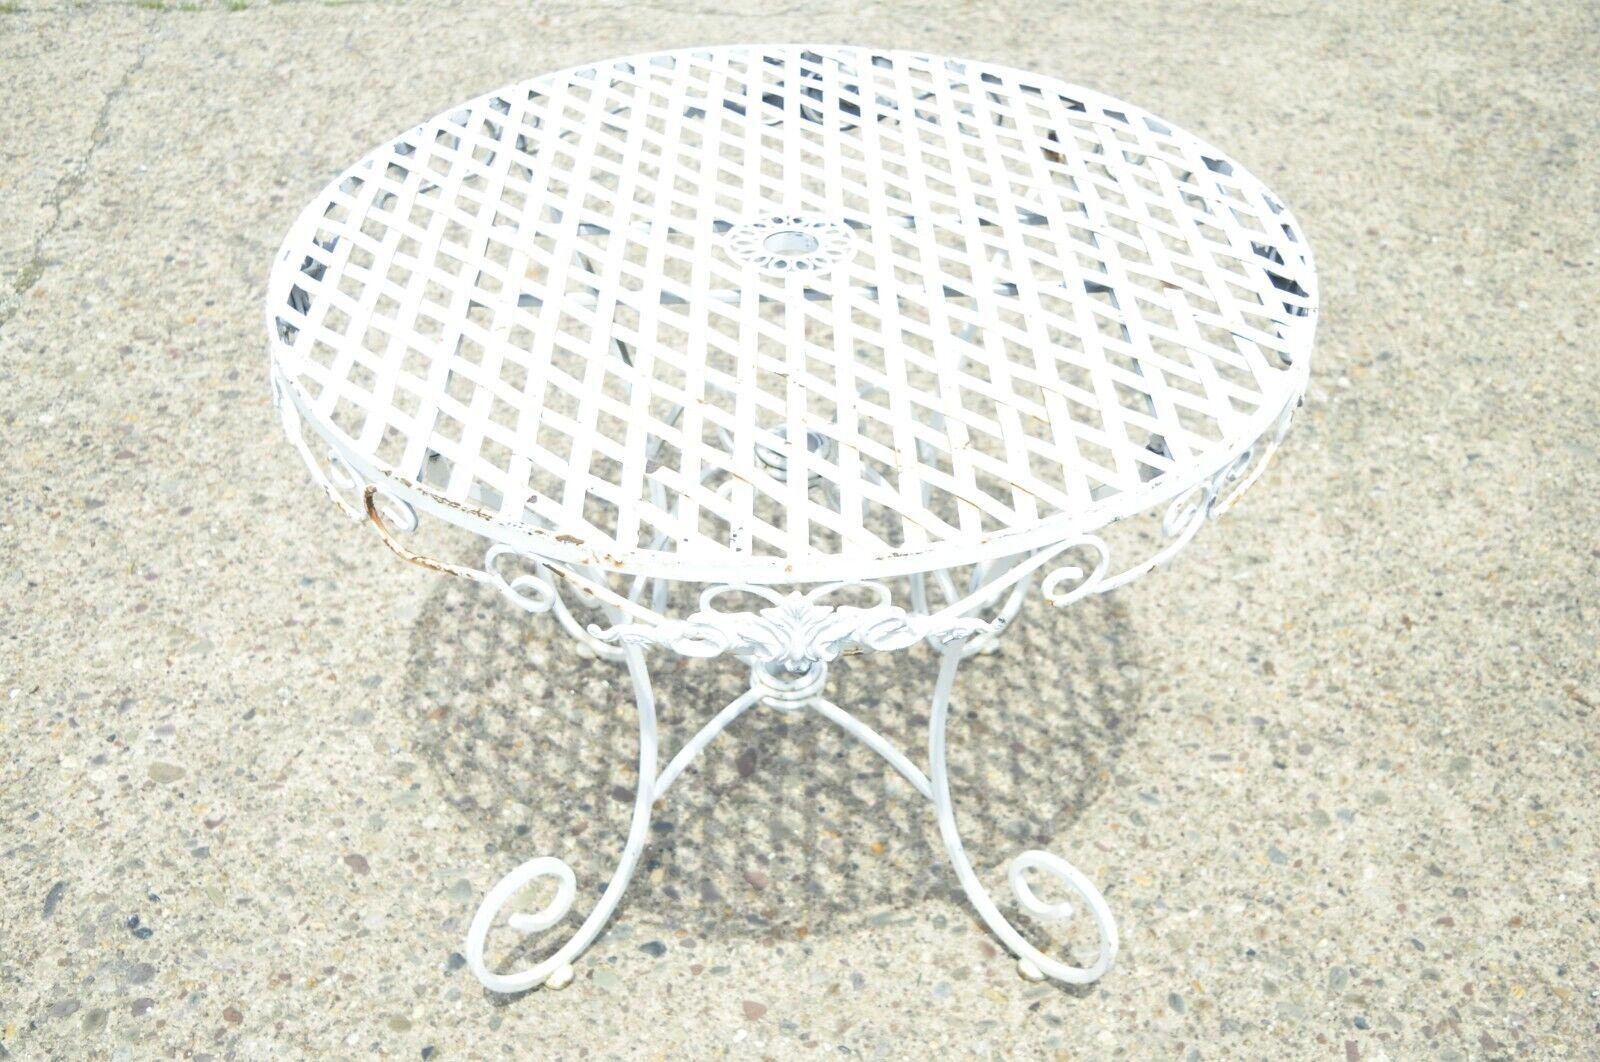 Wrought iron French Pastry style country lattice scroll round patio dining table. Item features a center umbrella hole, lattice design, scrolling base, lift off top with folding base, great style and form. Circa late 20th century.
Measurements: 30